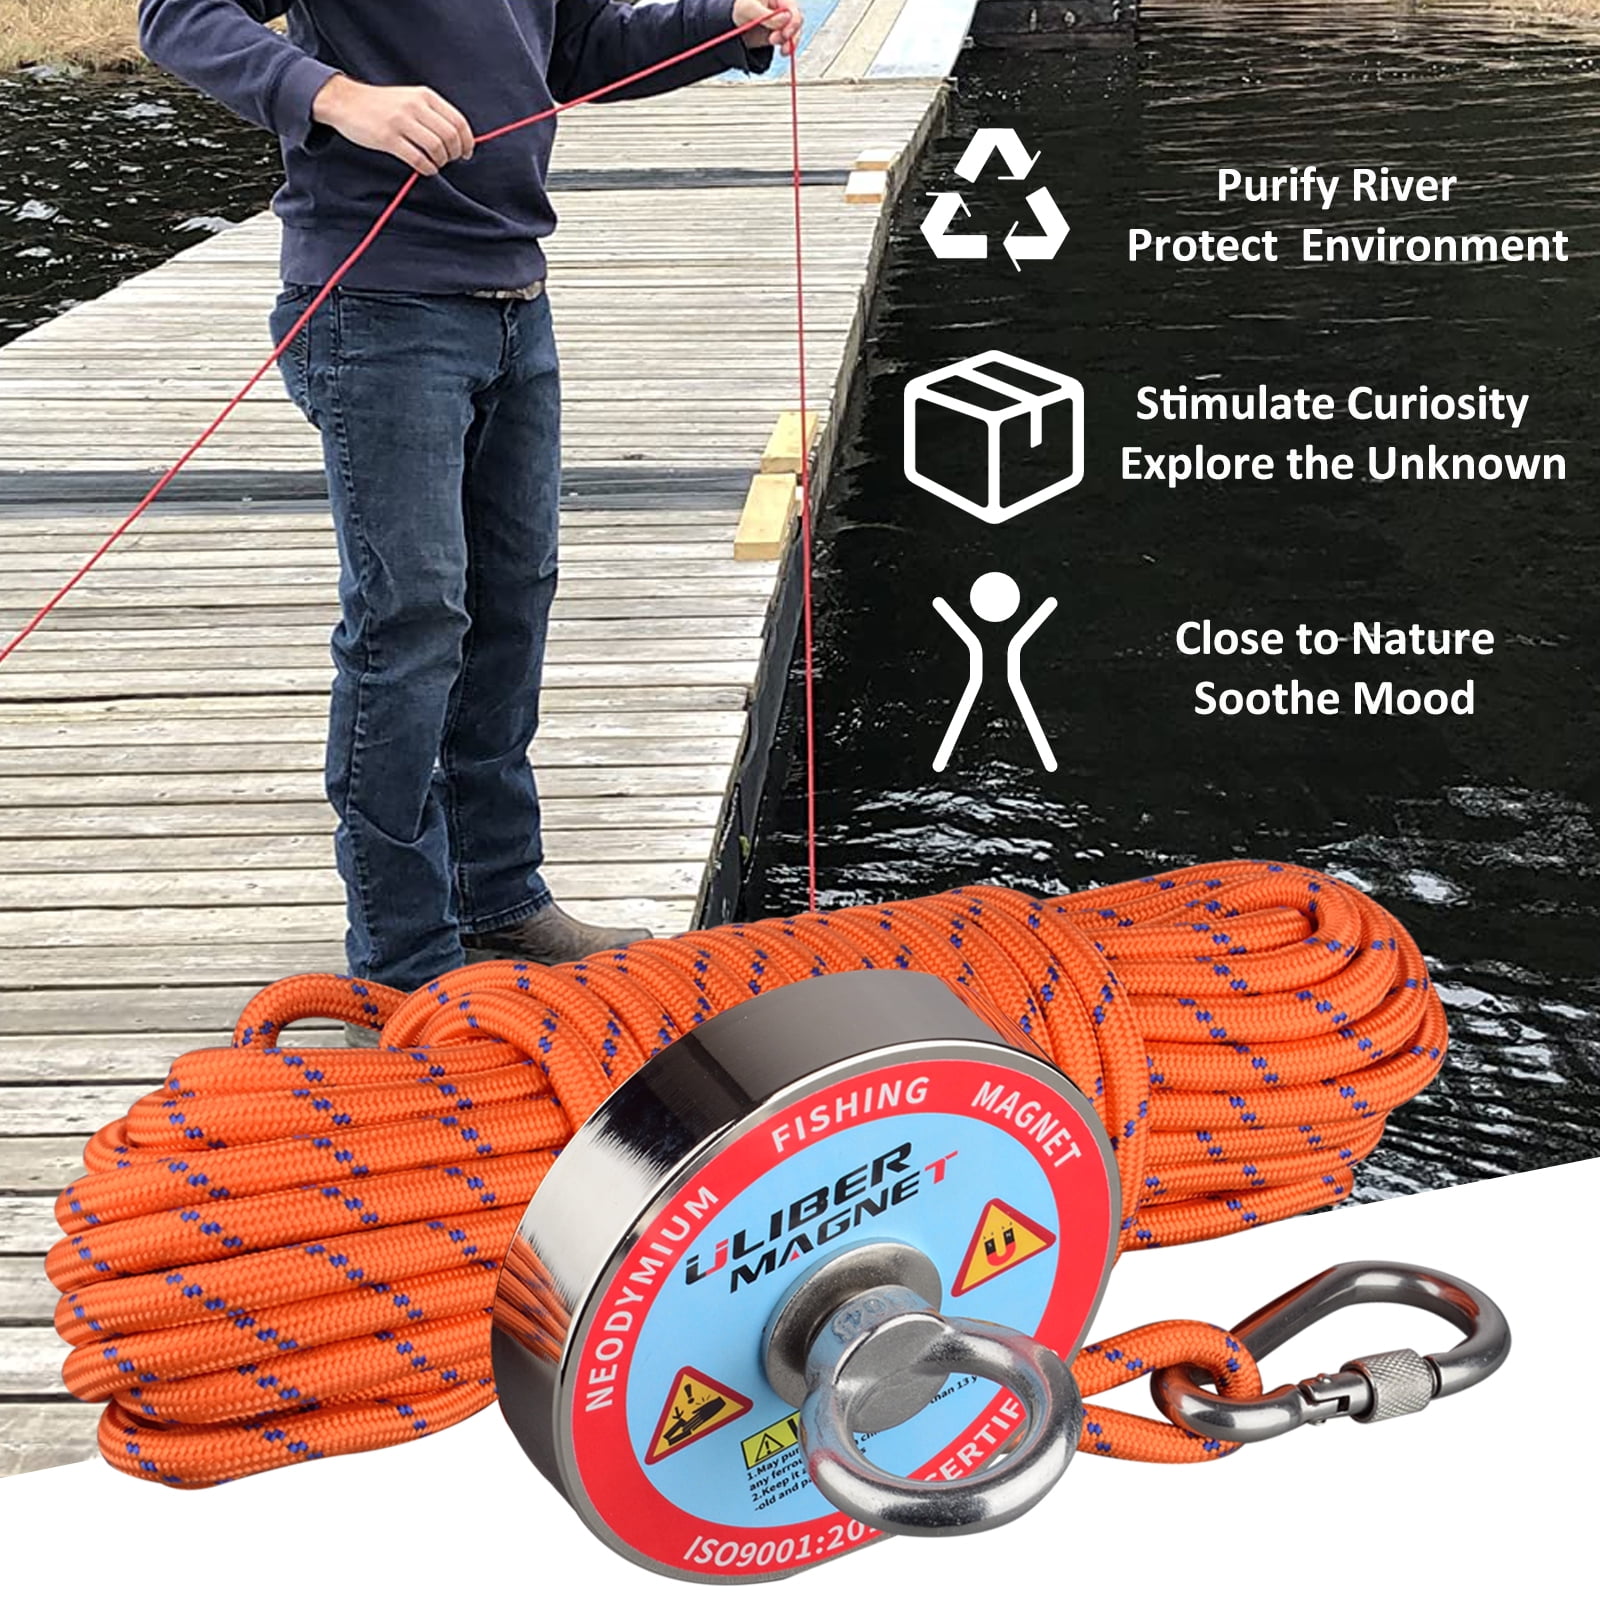 ULIBERMAGNET Super Strong Magnet Fishing Kit,Double Sided 2400lb Neodymium  Magnet,Heavy Dutry Magnet with 49Ft Salvage Rope,Non-Slip Gloves,Pocket for